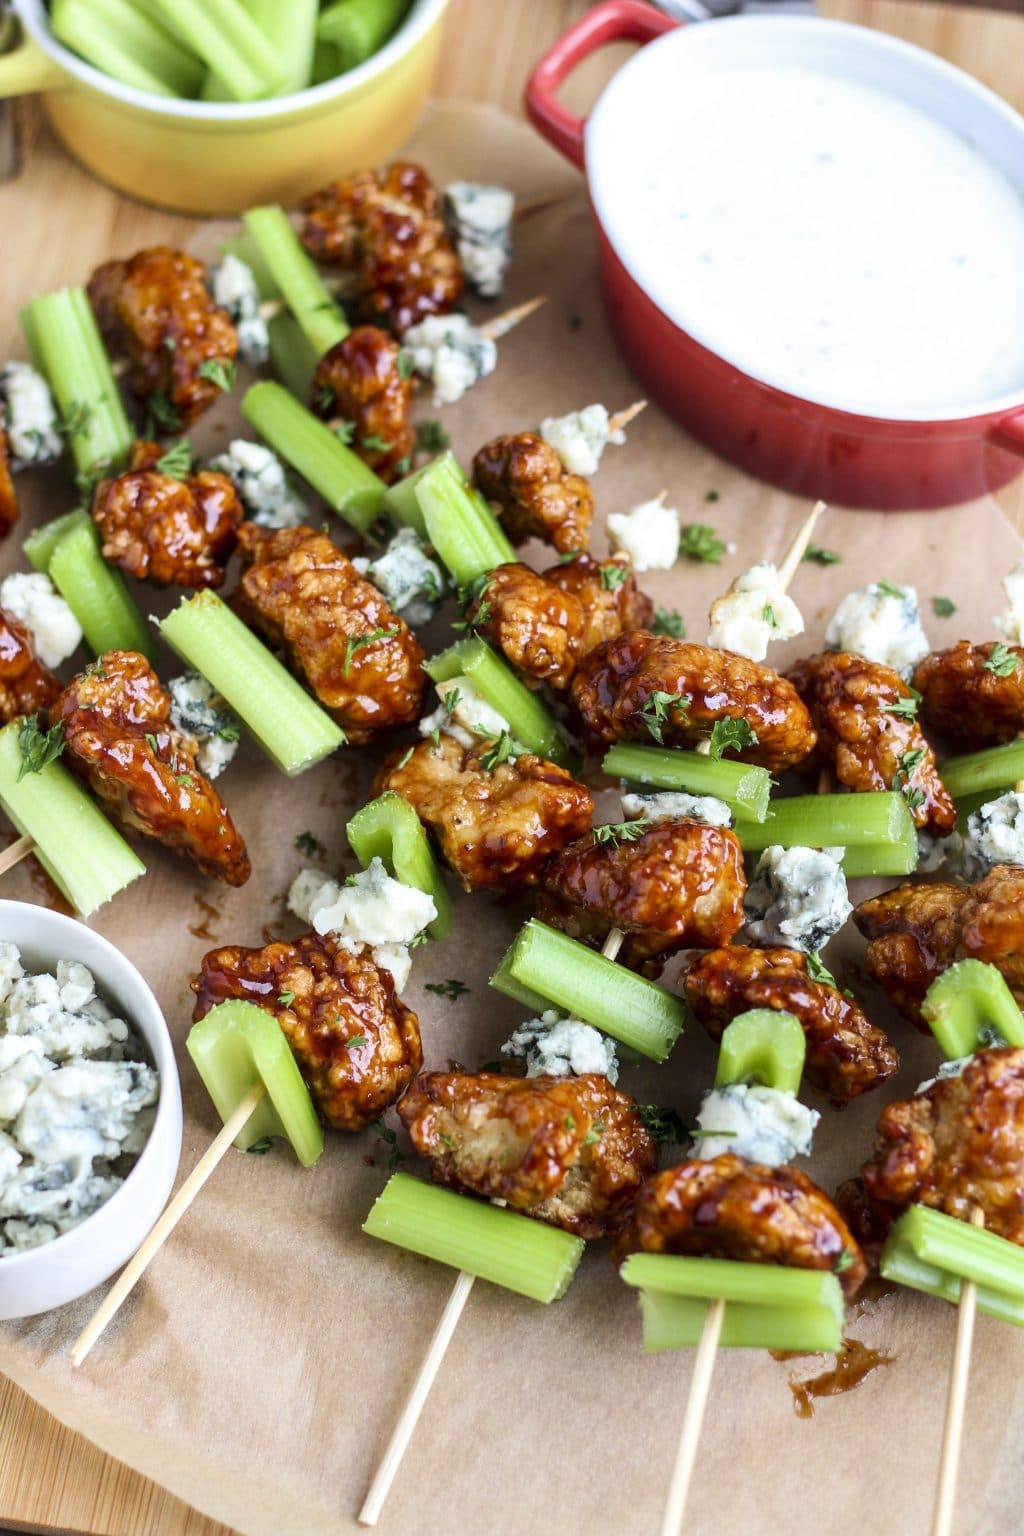 Chicken Skewer Appetizers Luxury Bbq Chicken Skewers with Blue Cheese Crumbles